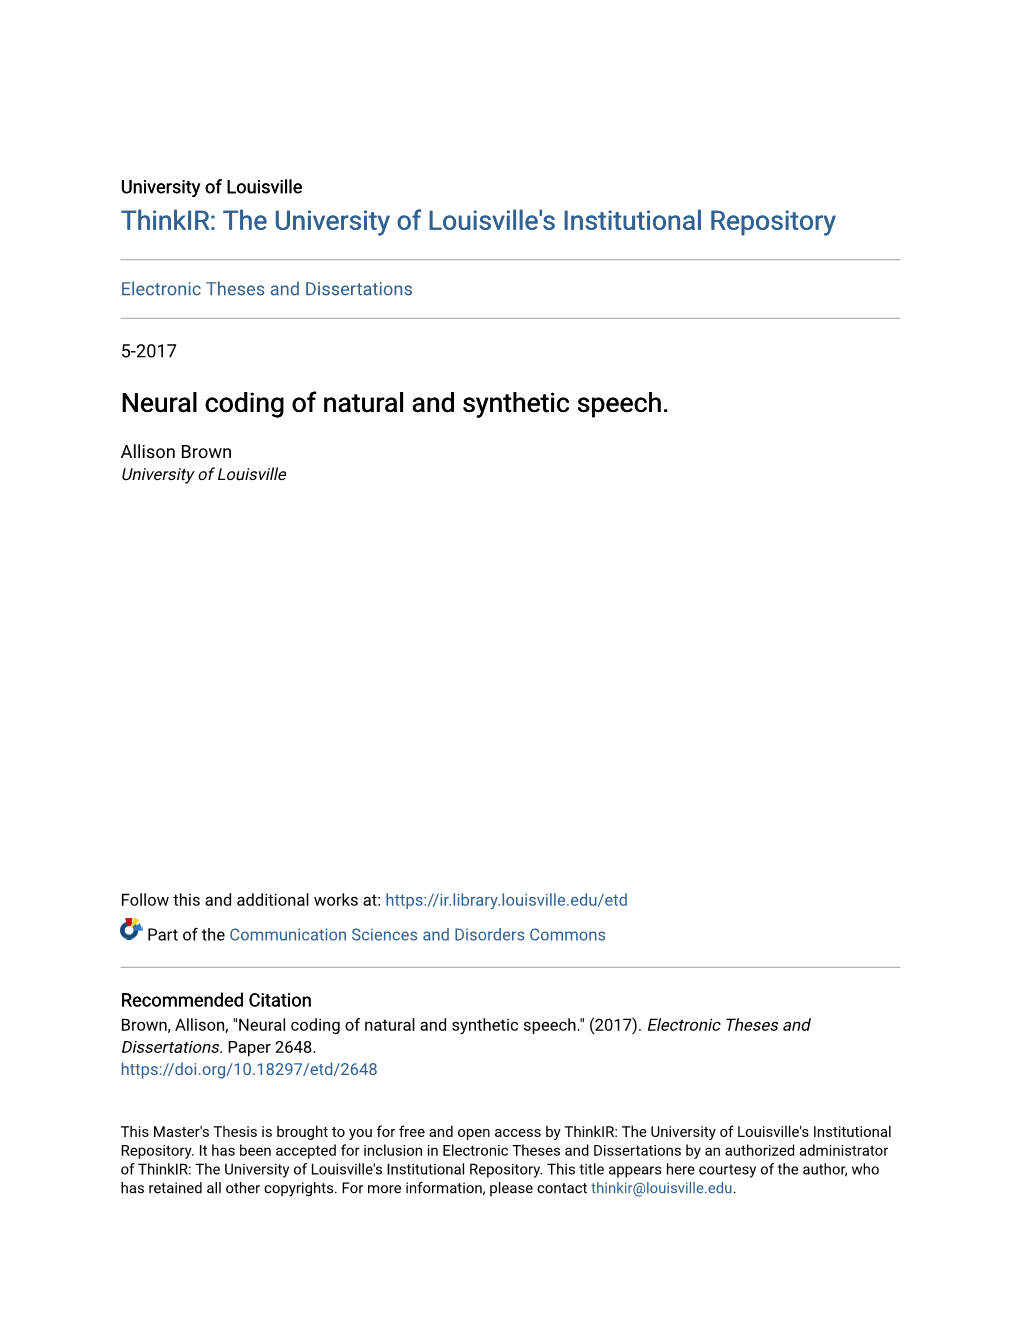 Neural Coding of Natural and Synthetic Speech